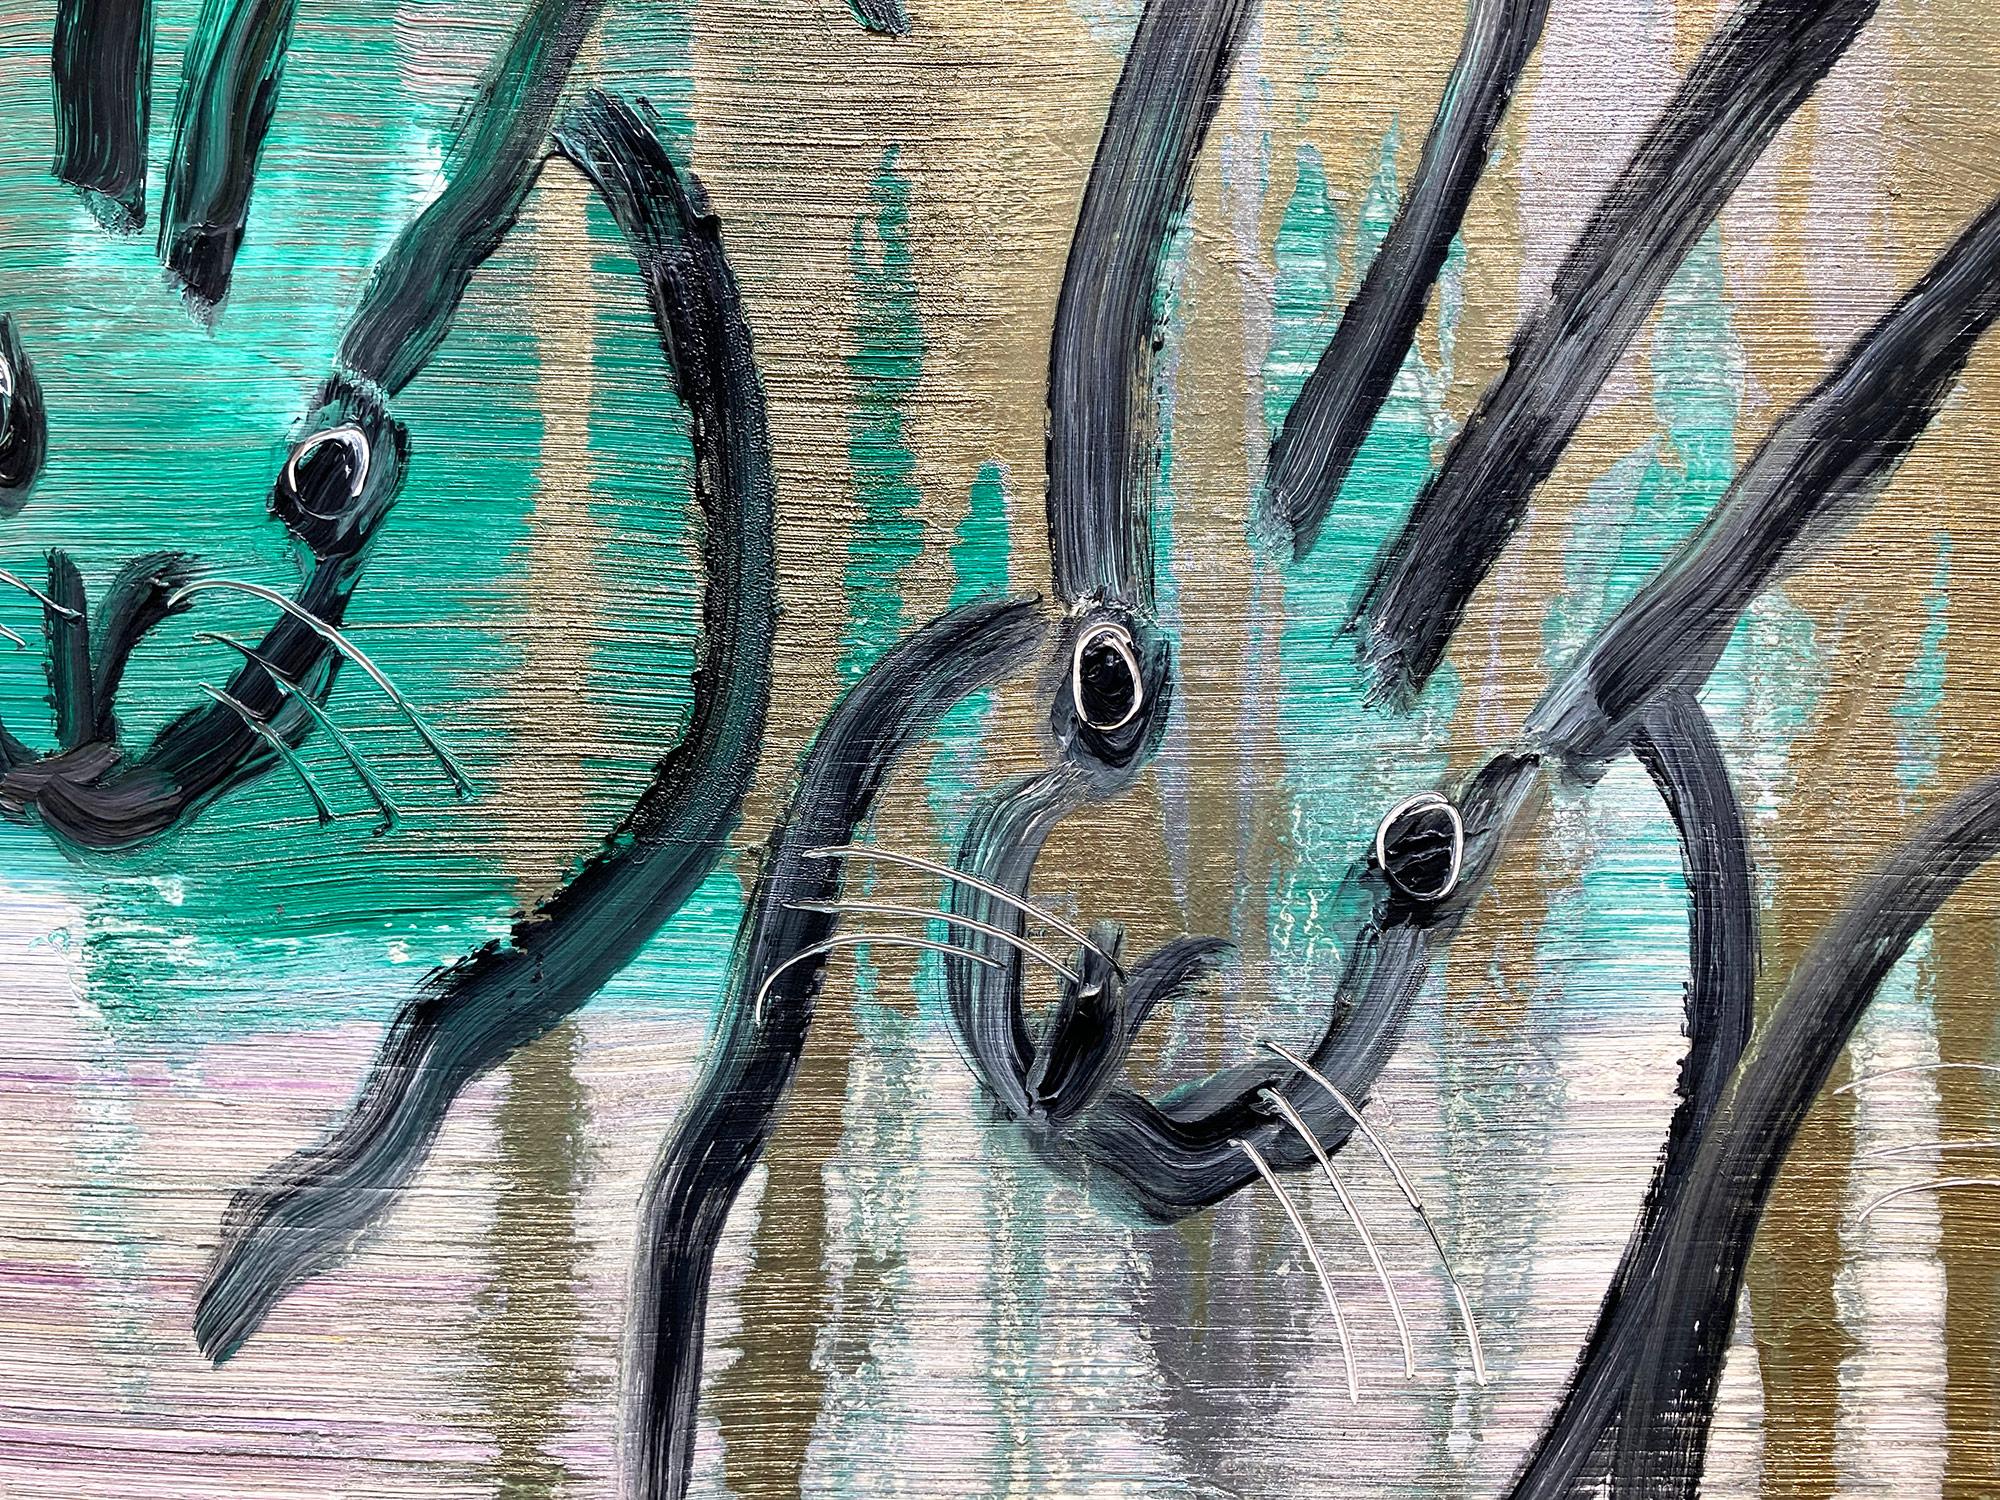 A stunning composition of one of Slonem's most iconic subjects, Bunnies. This piece depicts gestural figures of Bunnies against a multicolored background. Slonem traces these 22 bunnies with thick black paint. Inspired by nature and a genuine love